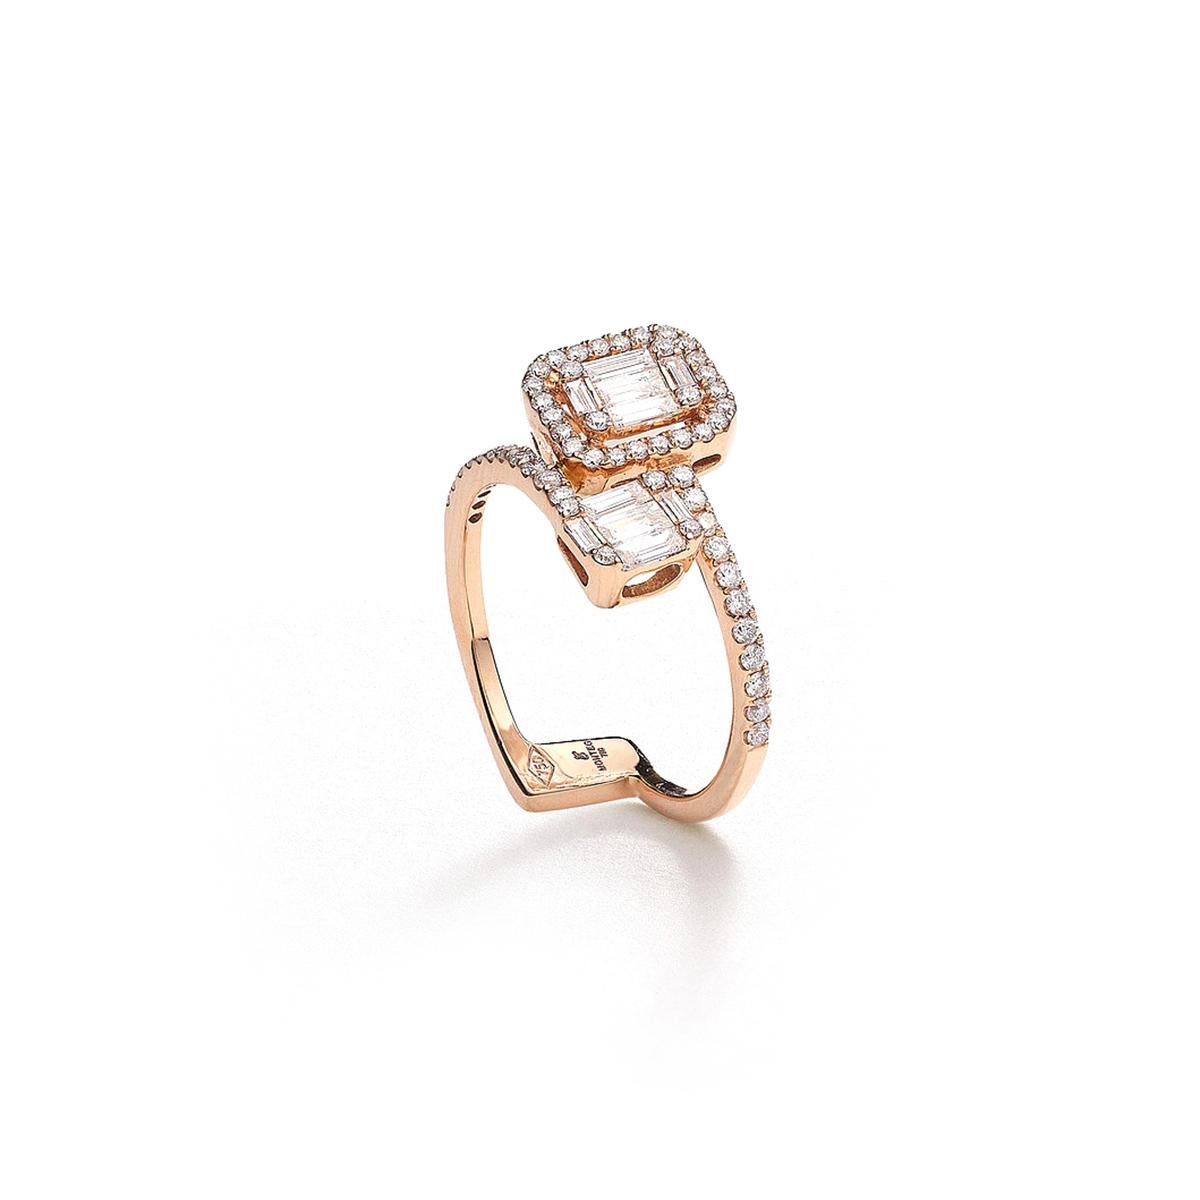 Ring in 18kt pink gold set with 10 baguette cut diamonds 0.33 cts and 54 diamonds 0.34 cts Size 52